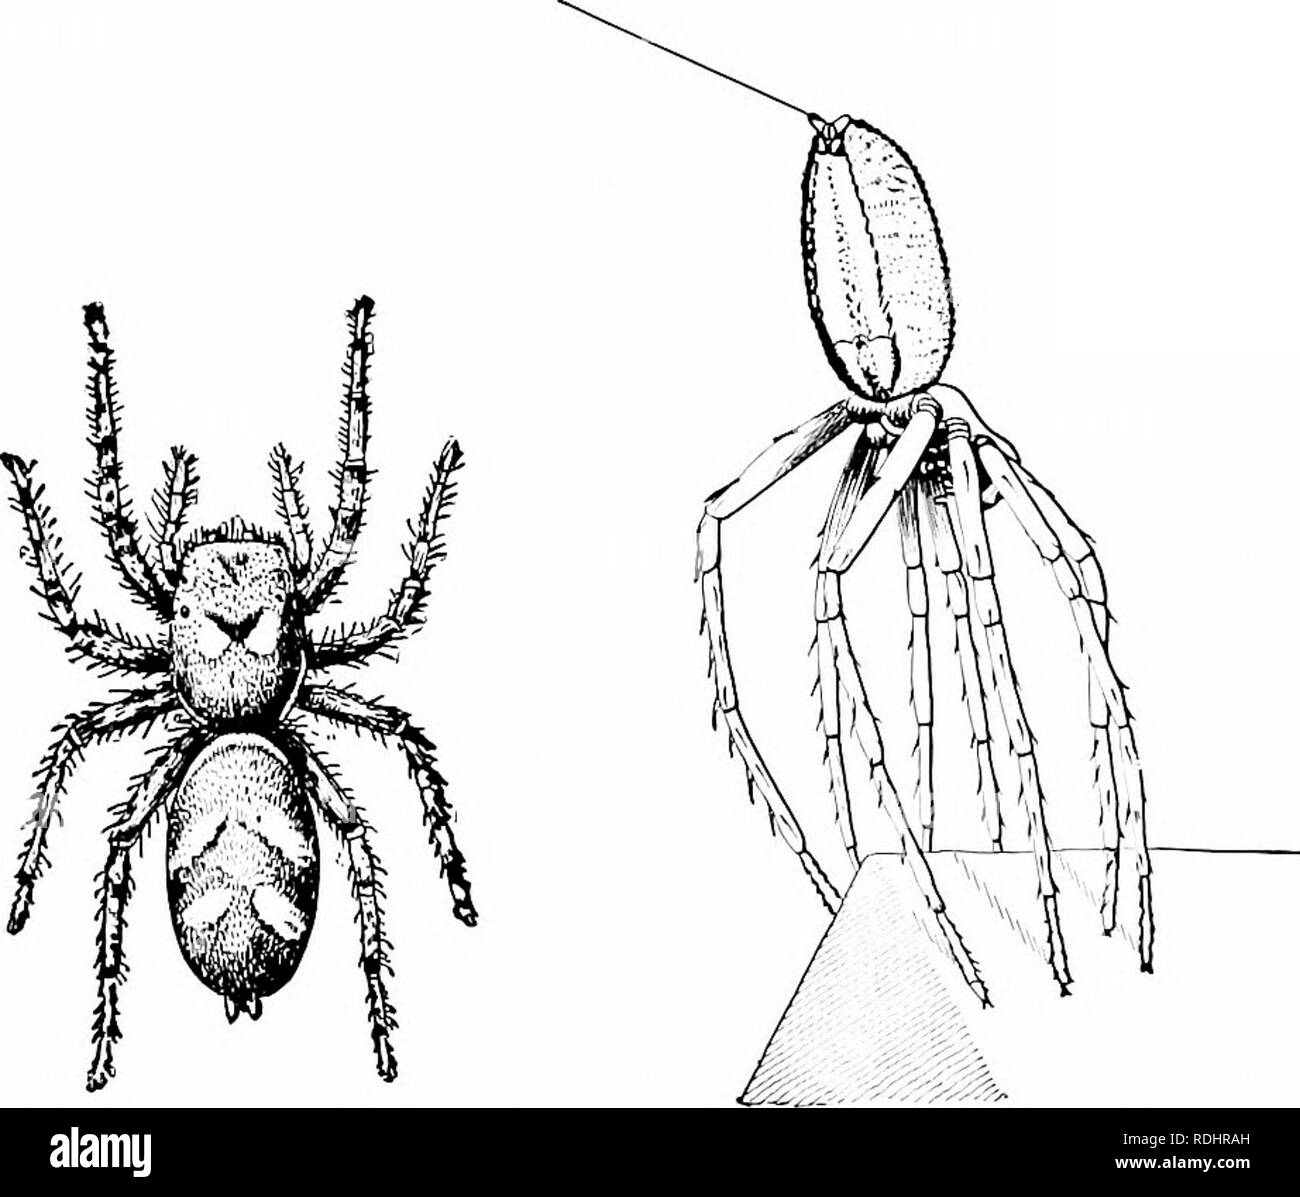 Elements of zoology, to accompany the field and laboratory study of animals.  Zoology. 116 ZOOLOGY The scorpions (Fig. 119) and their alhes are more  primitive than the spiders, since their bodies